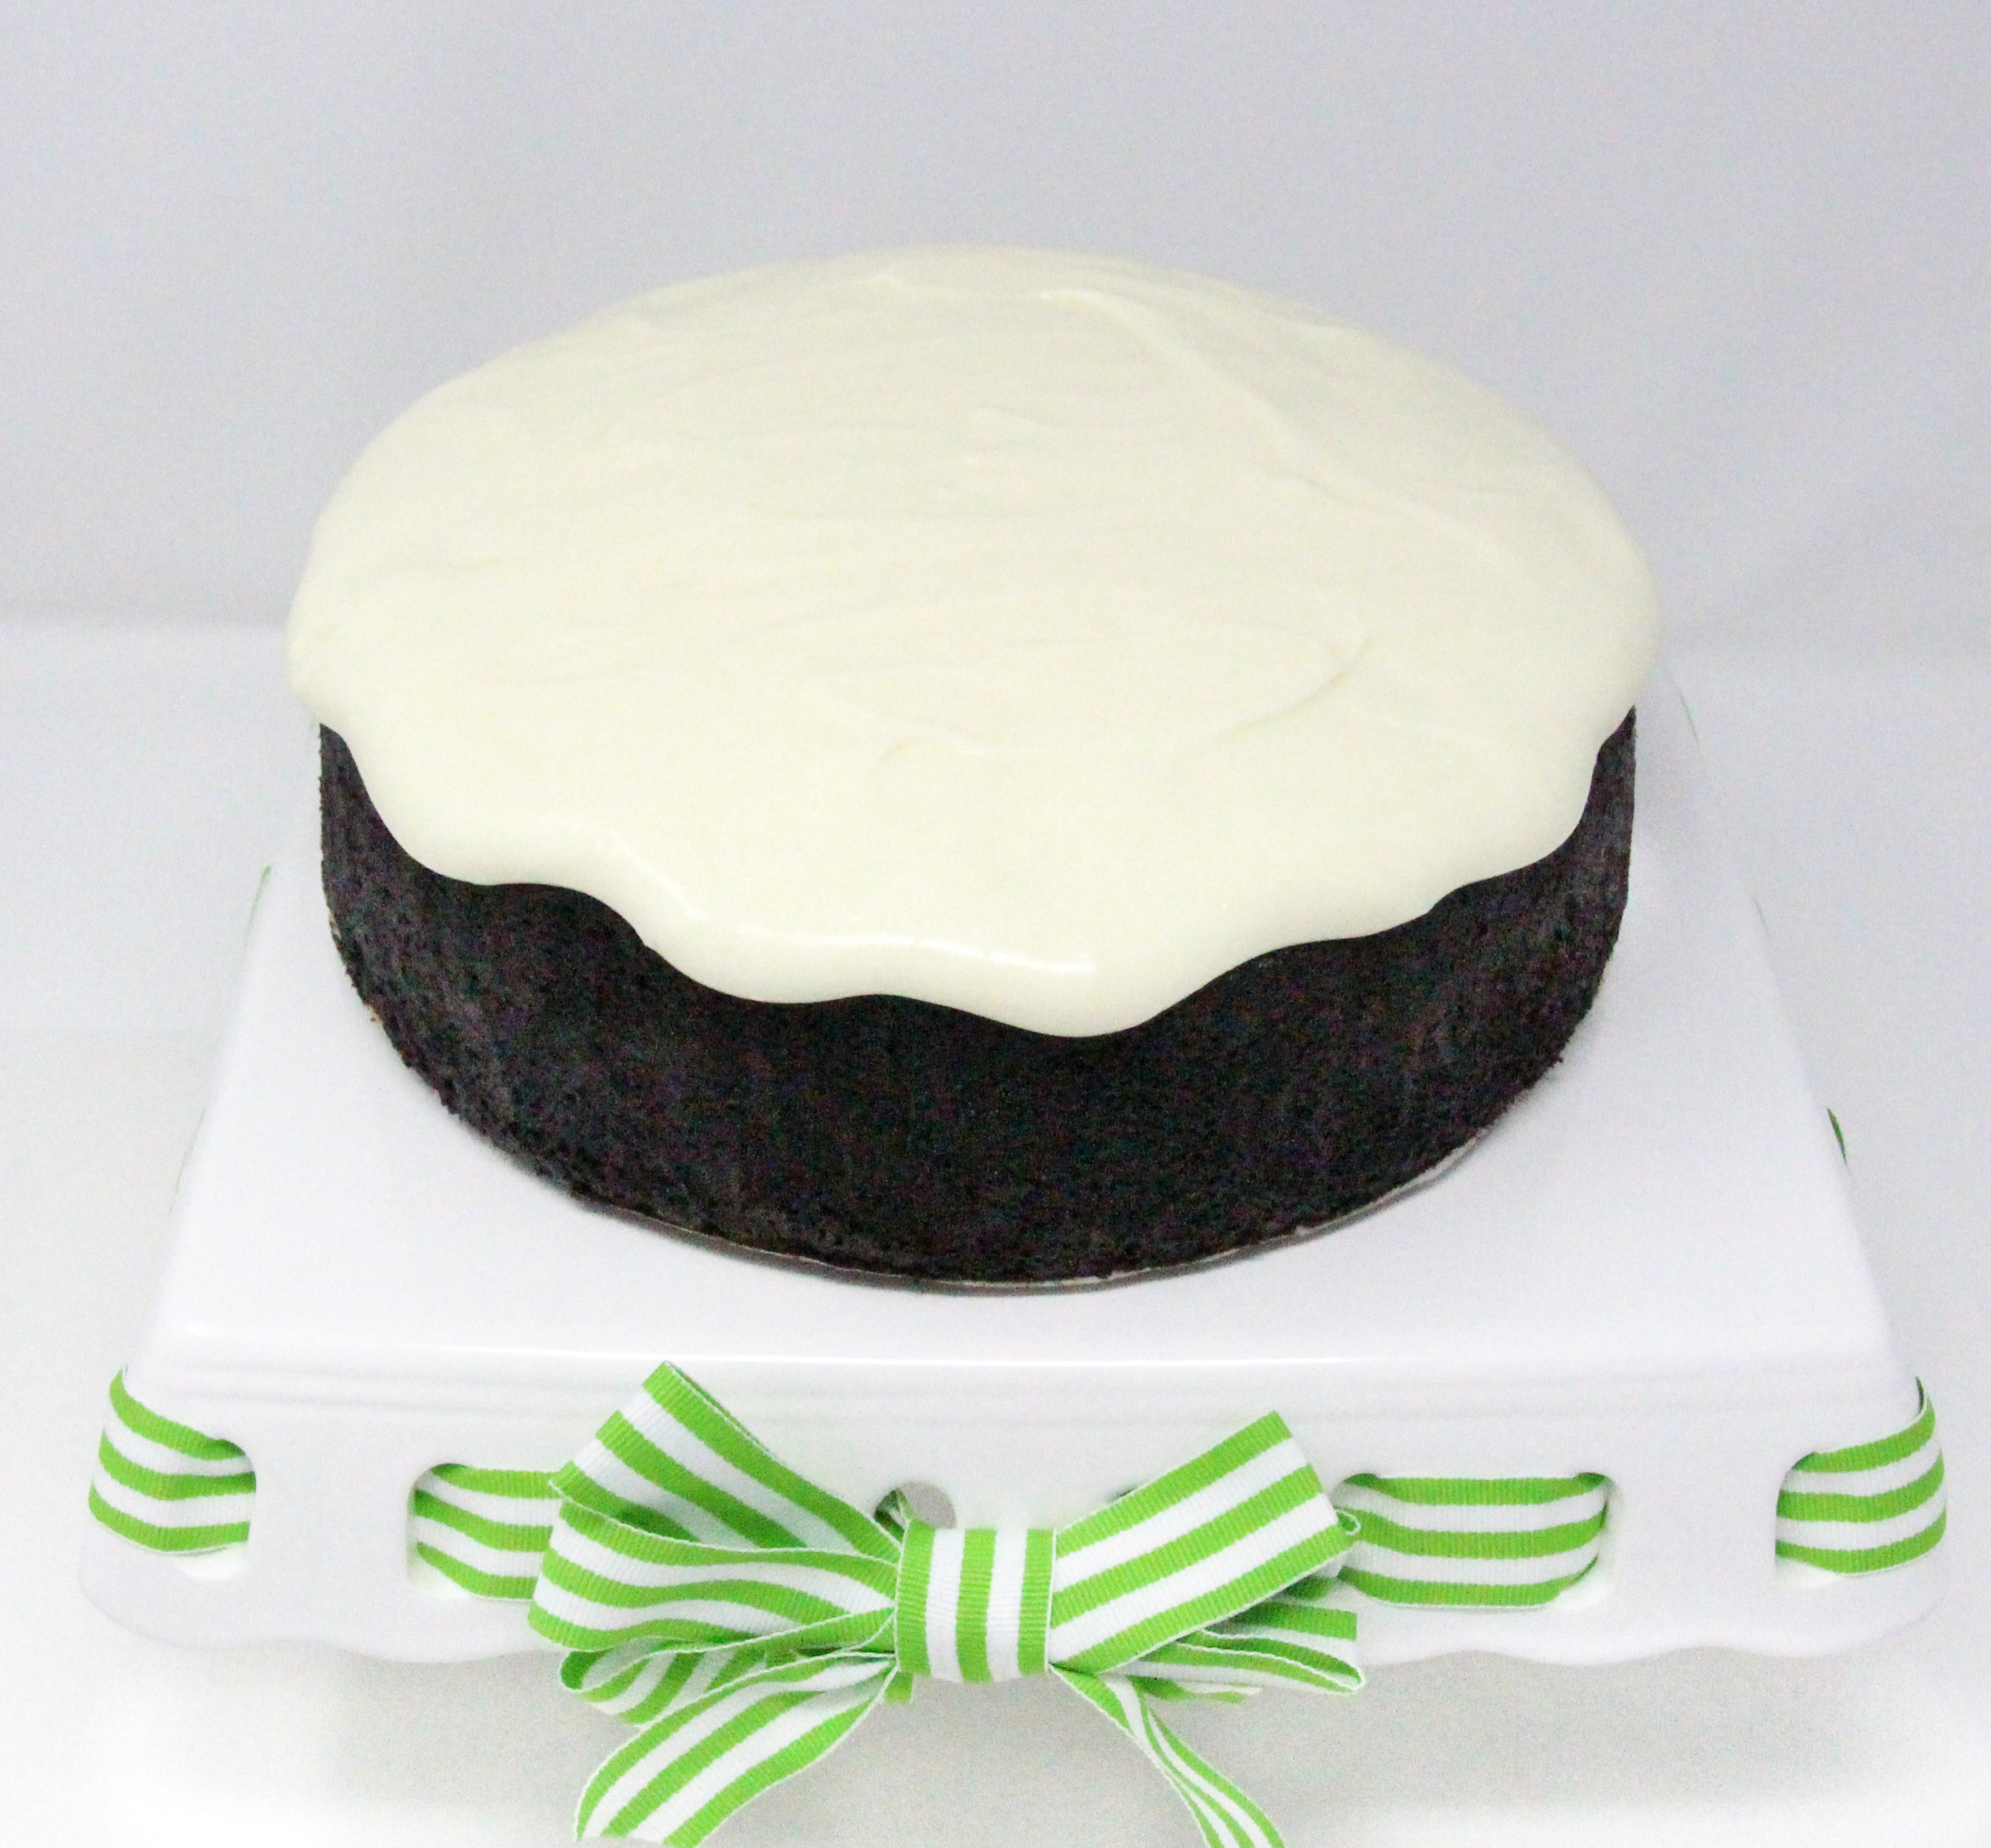 Ultra chocolaty, Chocolate Guinness Cake is moist and rich, thanks to a generous measure of cocoa, Guinness, and sour cream. Topped with tangy cream cheese frosting elevates the dessert to pure deliciousness. Recipe shared with permission granted by Carlene O'Connor, author of MURDER AT AN IRISH BAKERY. 